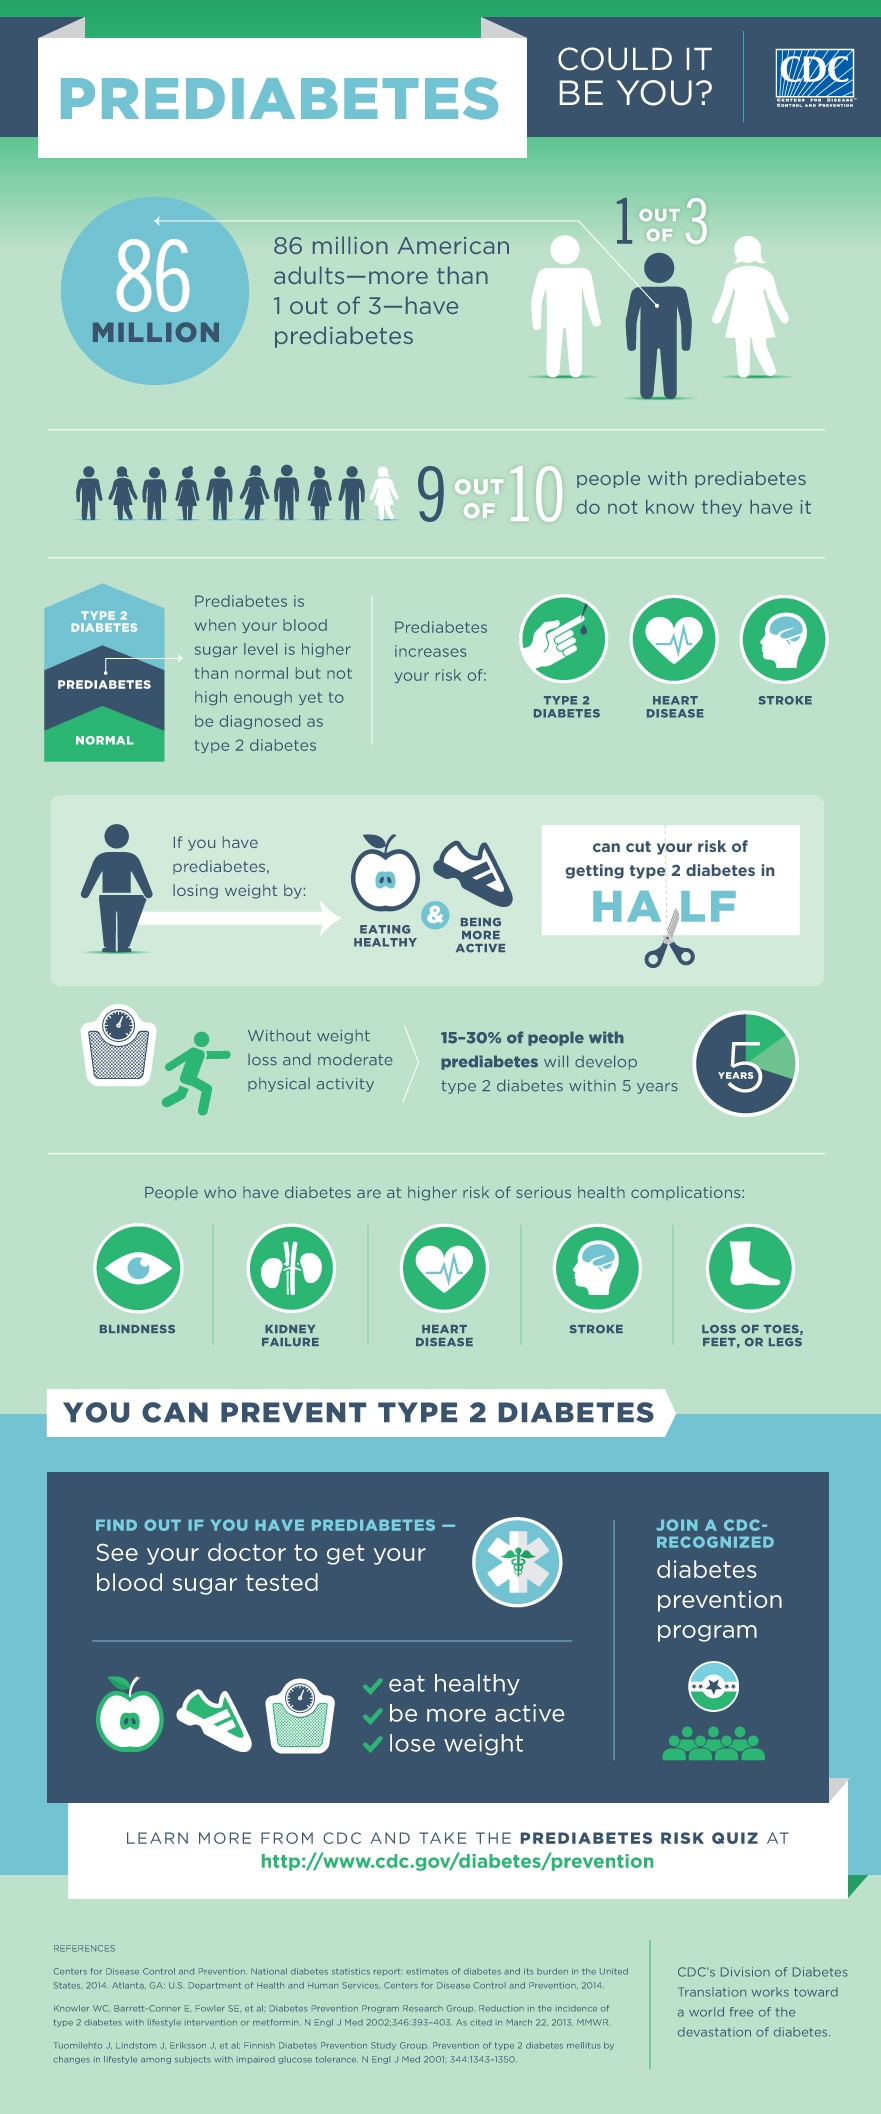 PreDiabetes - Could It be you?